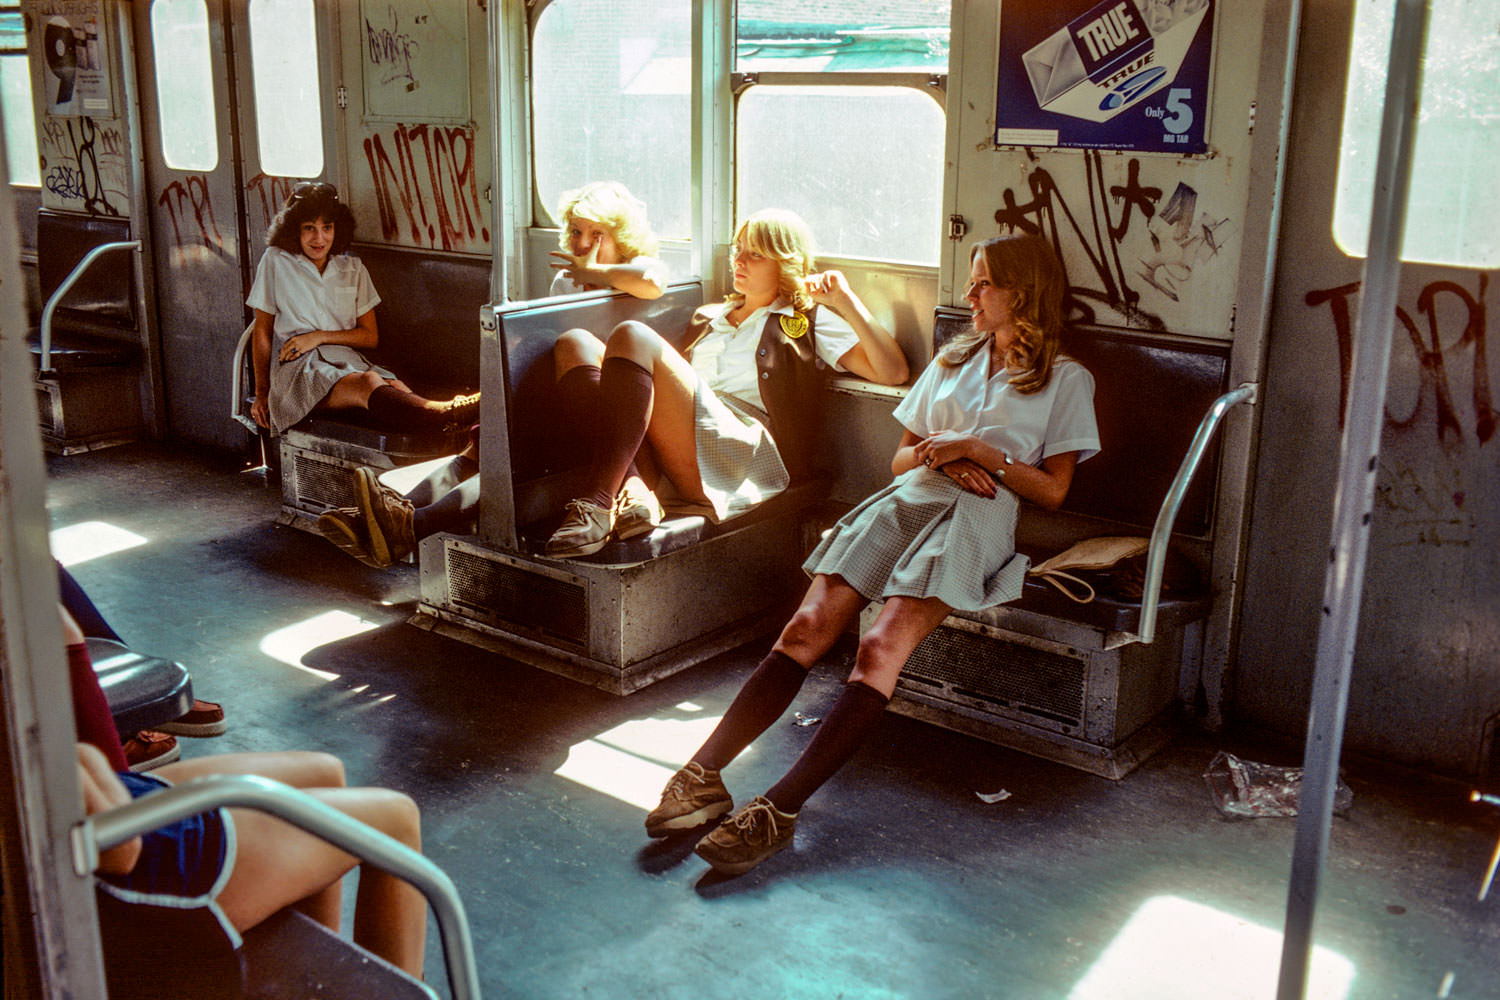 Eerie Photos Of NYC Subway From 70's & 80's Shed New Light On City